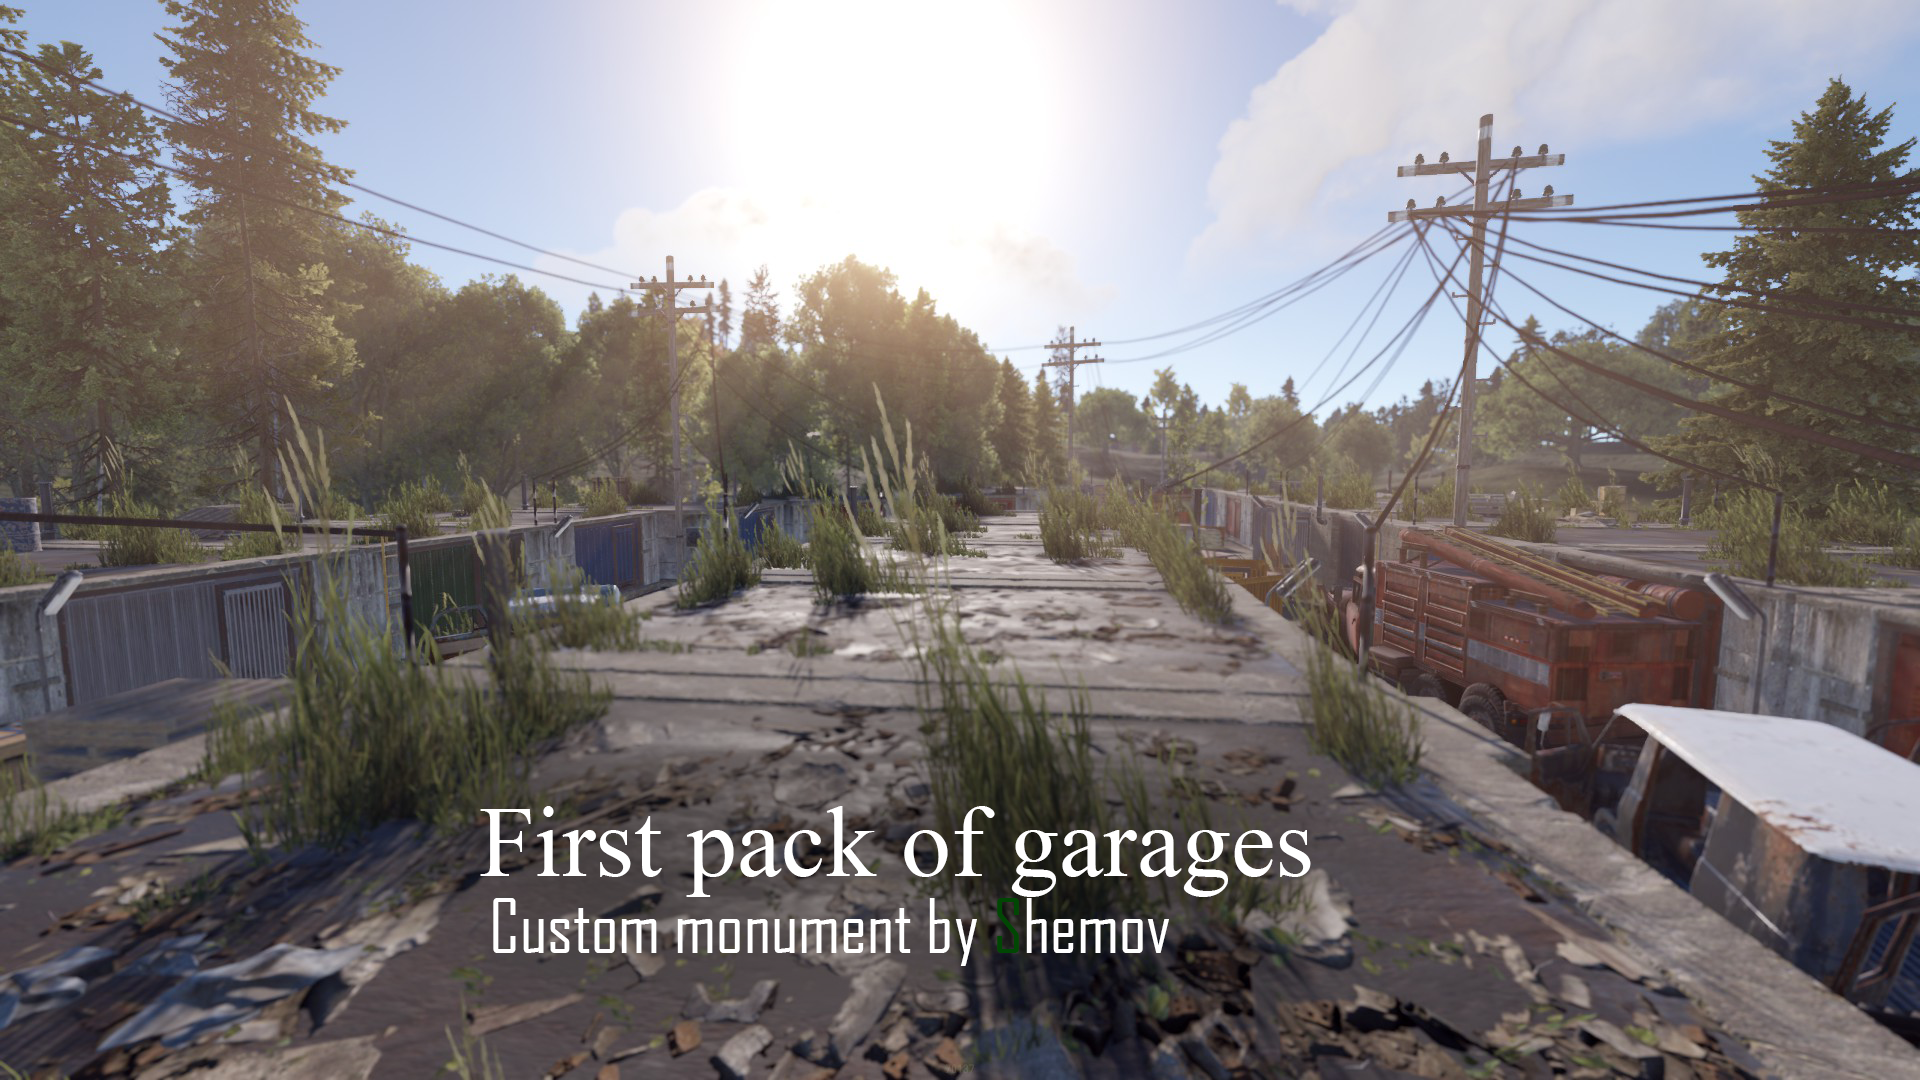 Garages A | Pack of garages monuments by Shemov